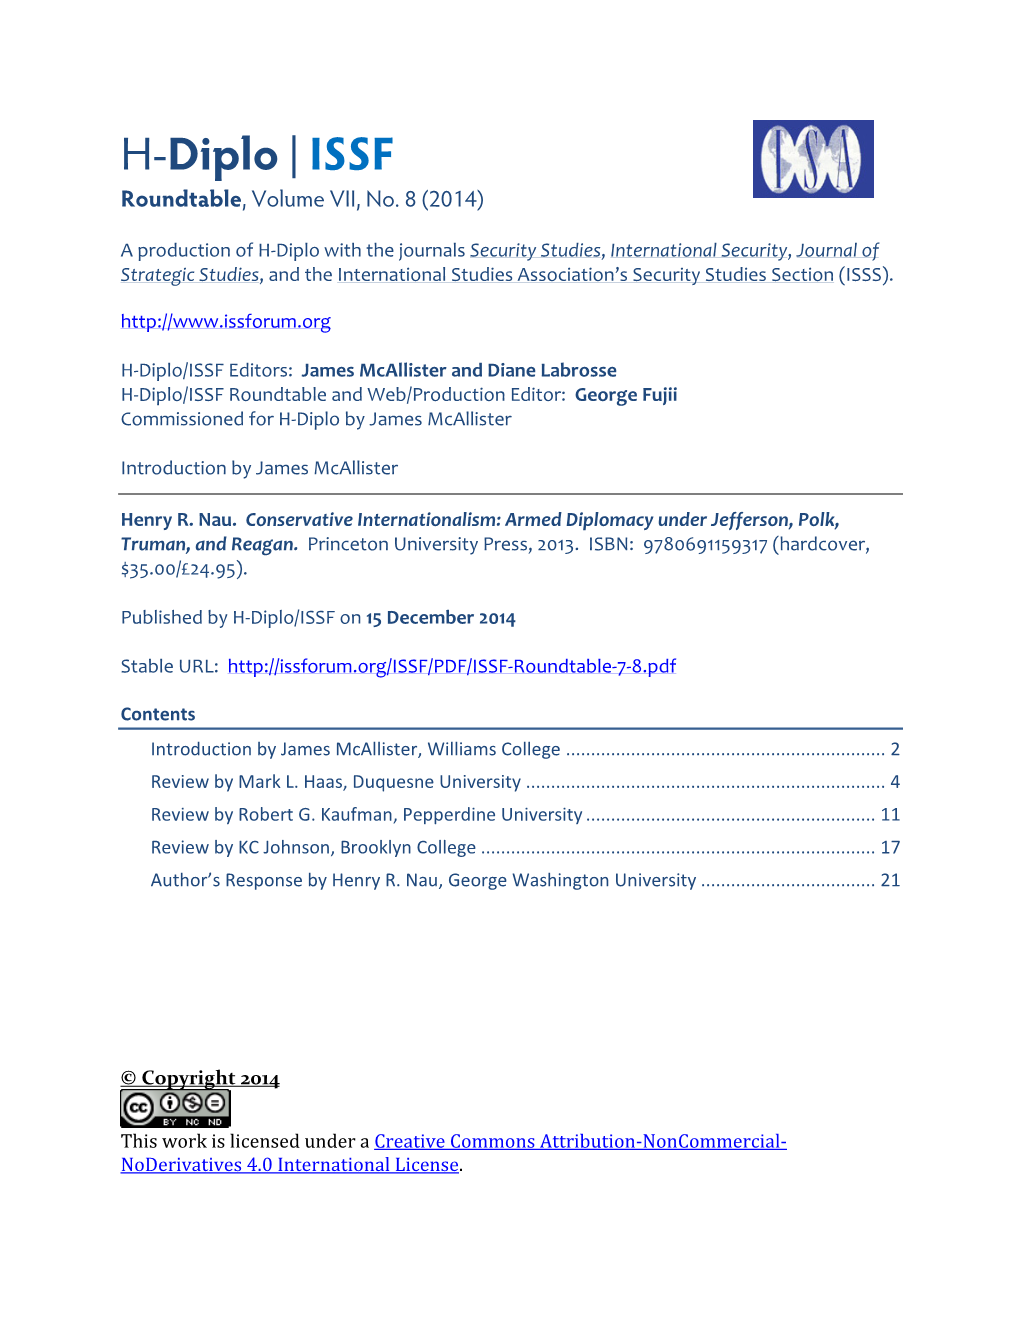 H-Diplo/ISSF Roundtable, Vol. 7, No. 7 (2014)